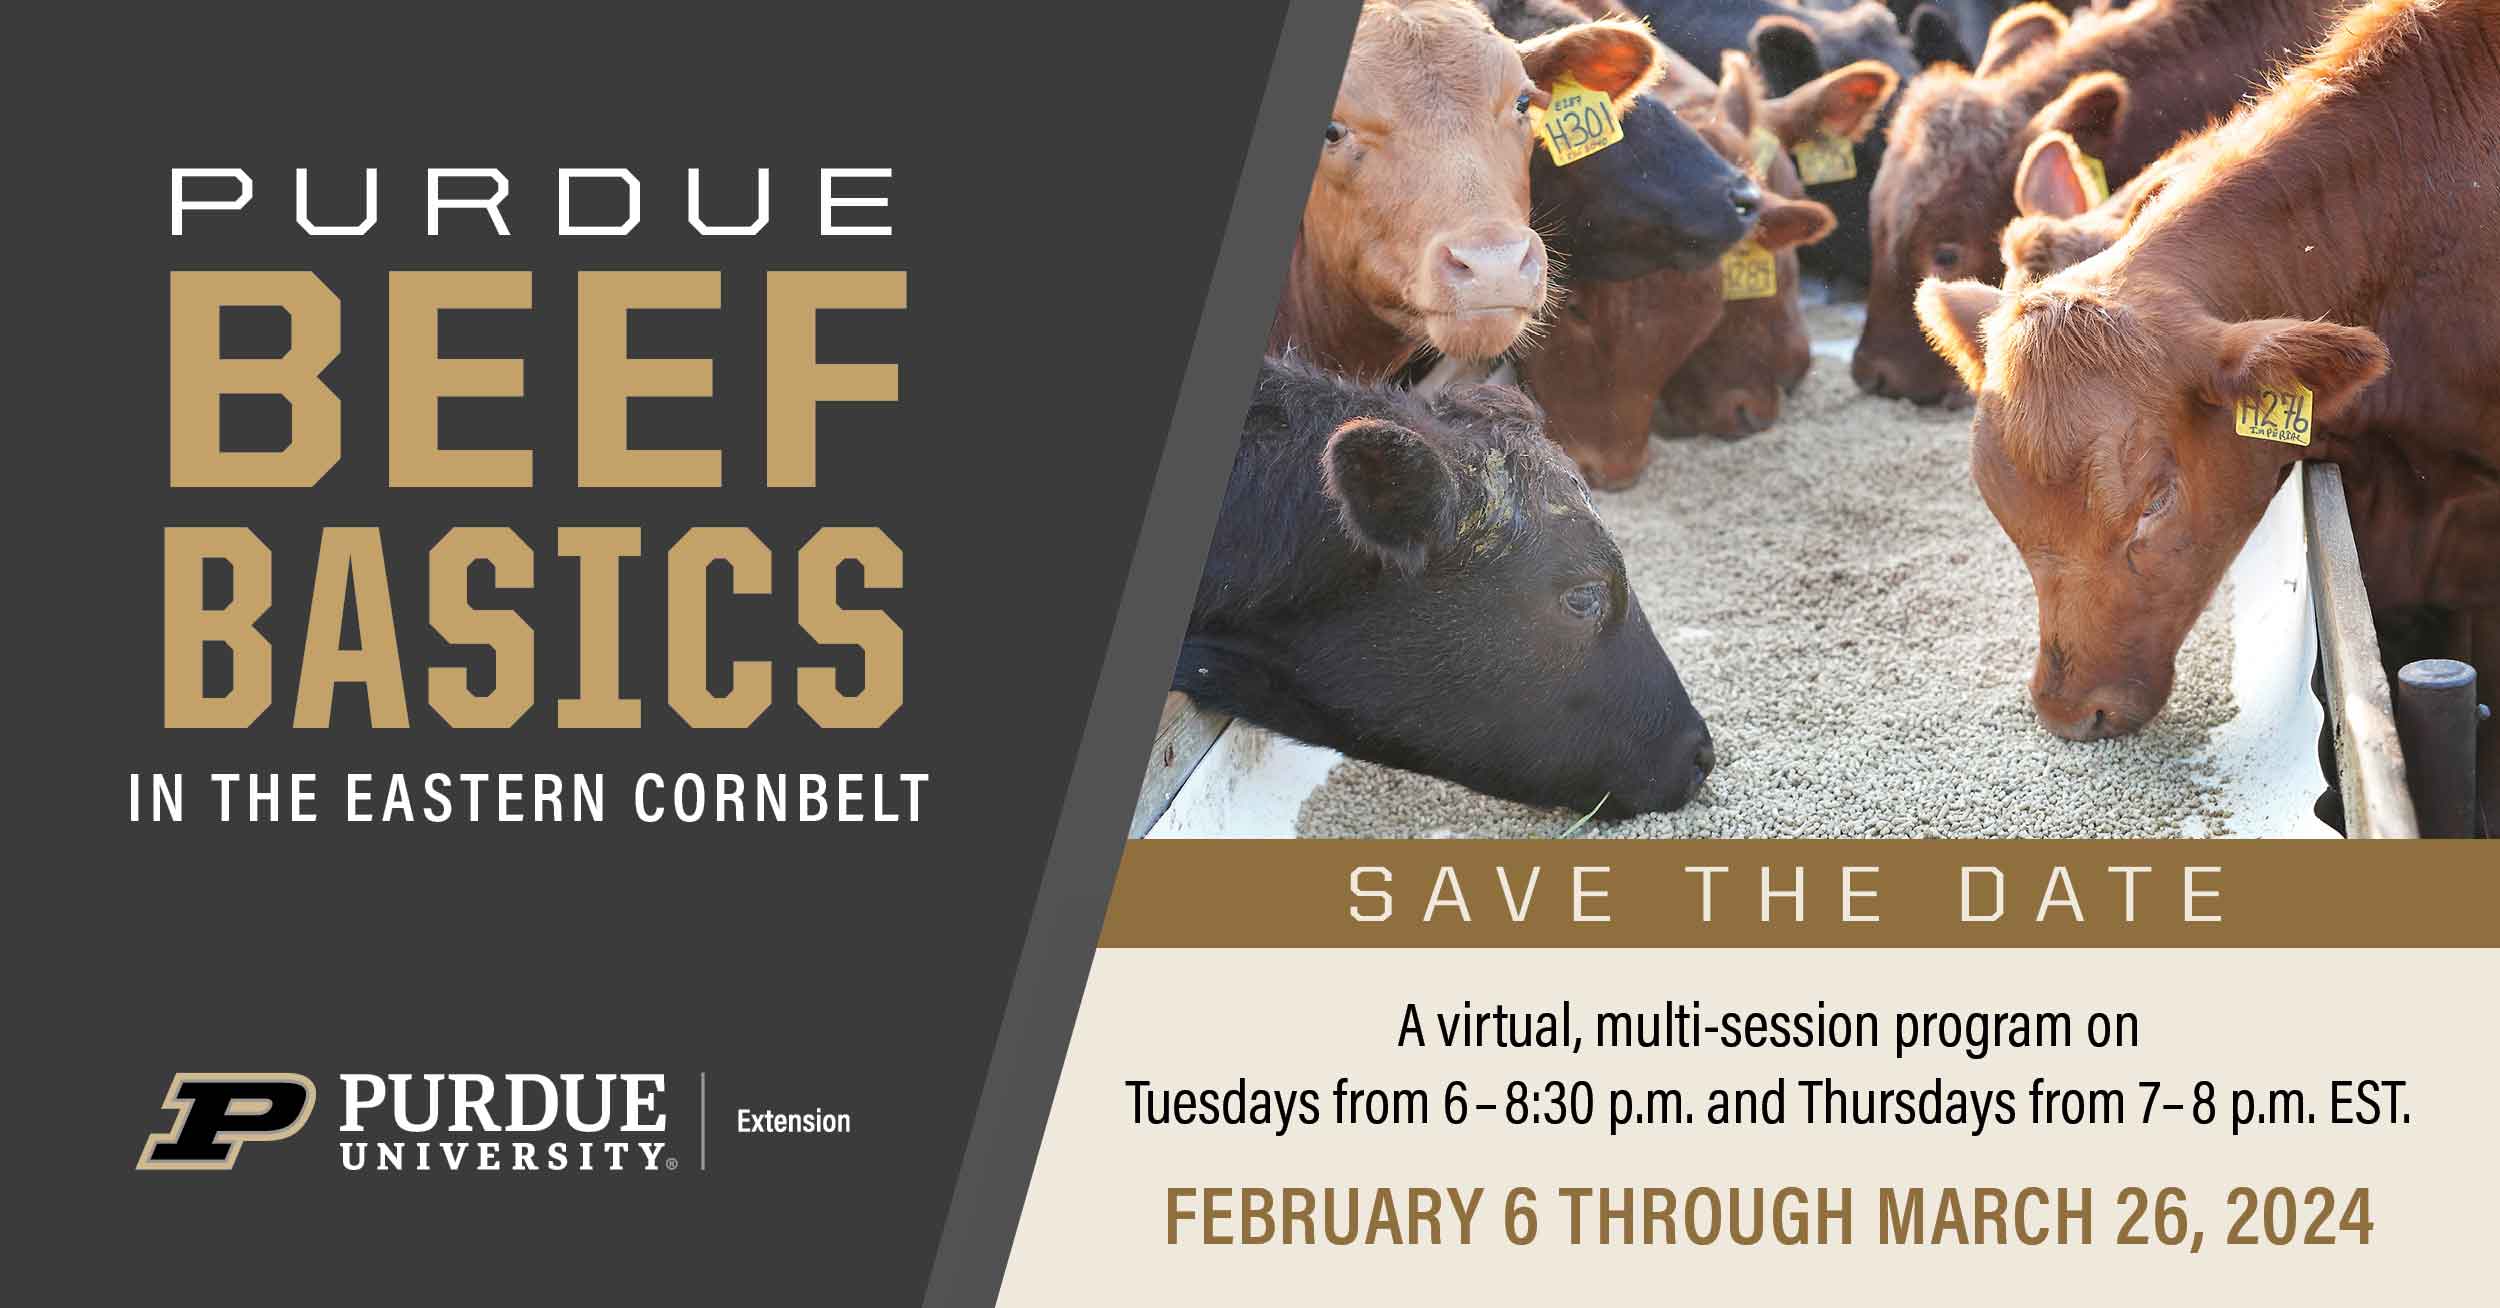 Beef Basics Every Tuesday and Thursday Feb 6-March 26